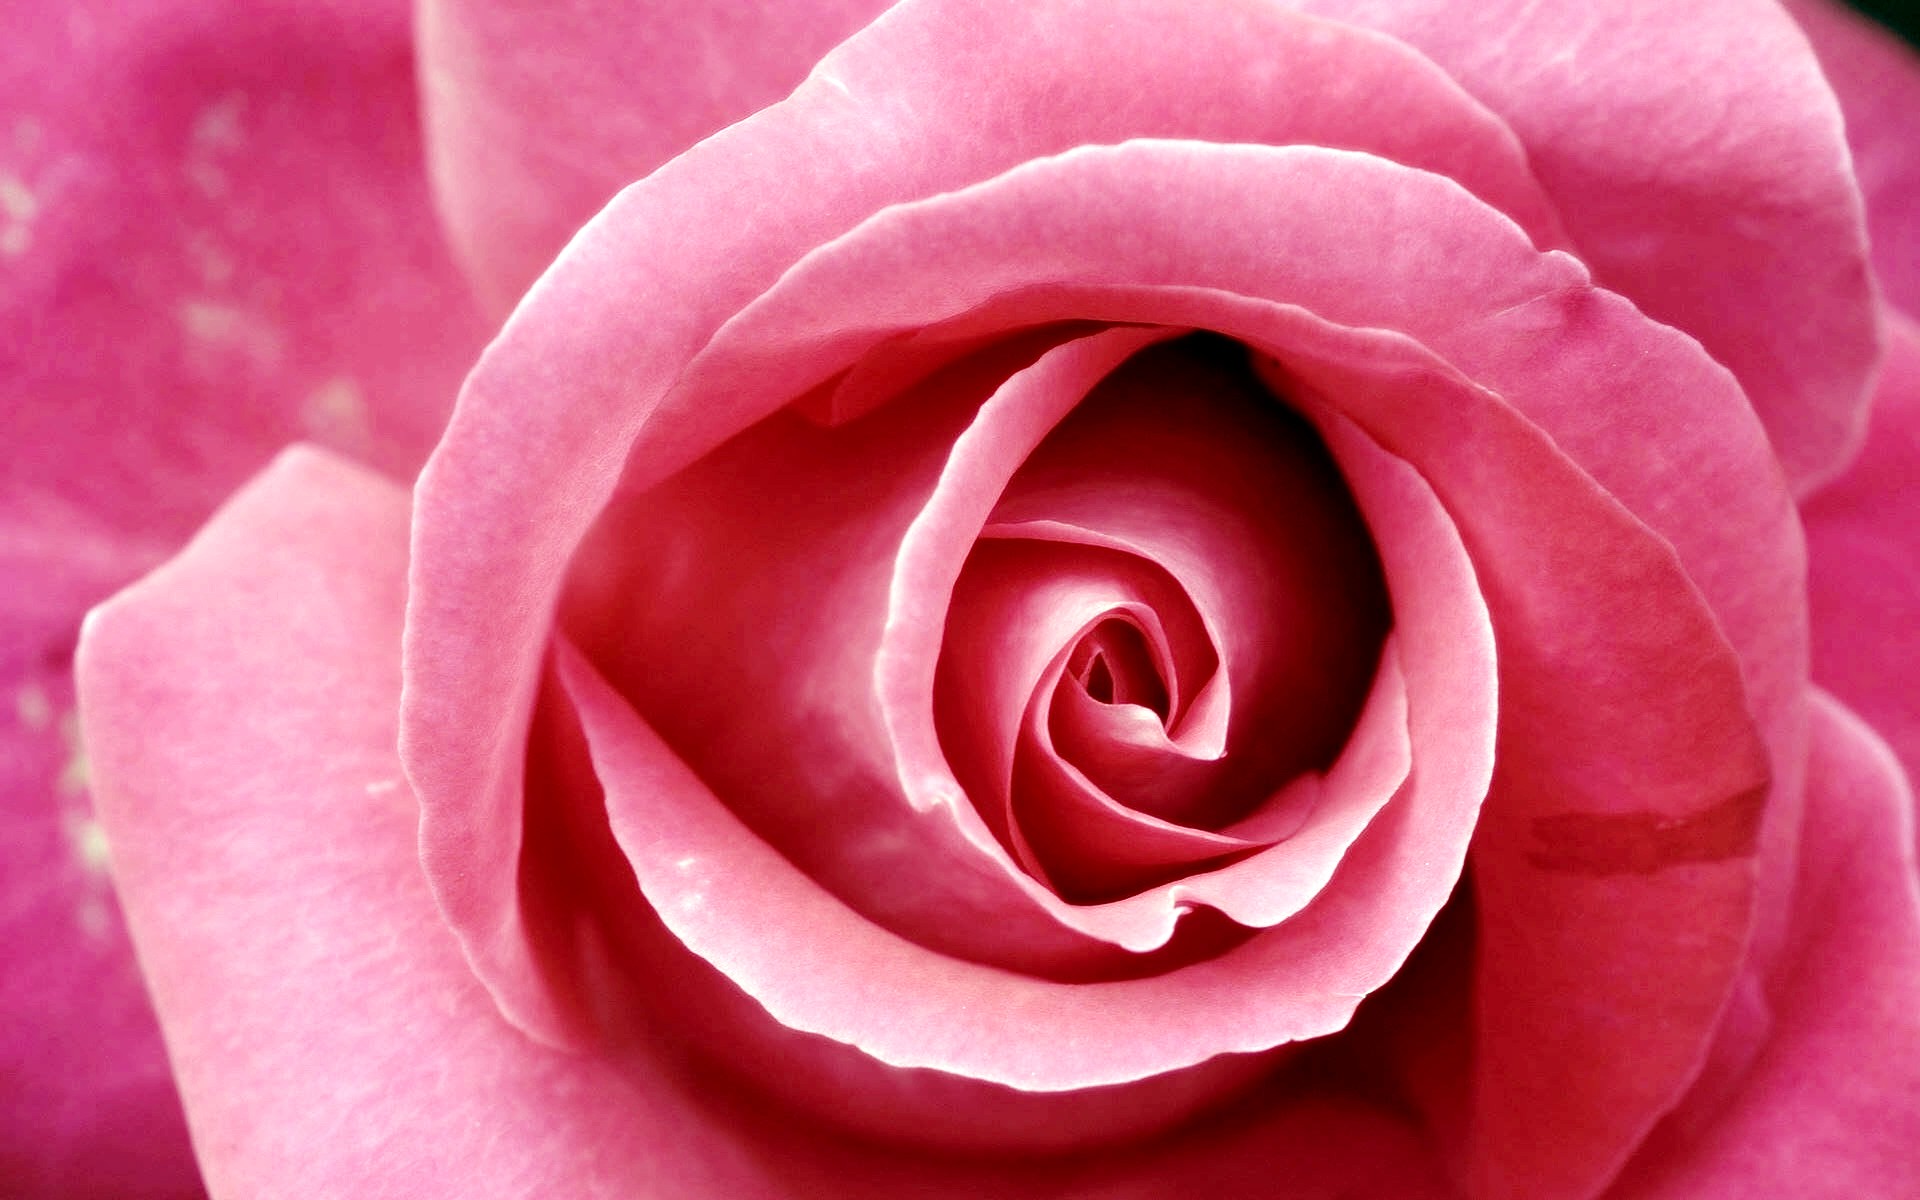 2100+ Rose HD Wallpapers and Backgrounds